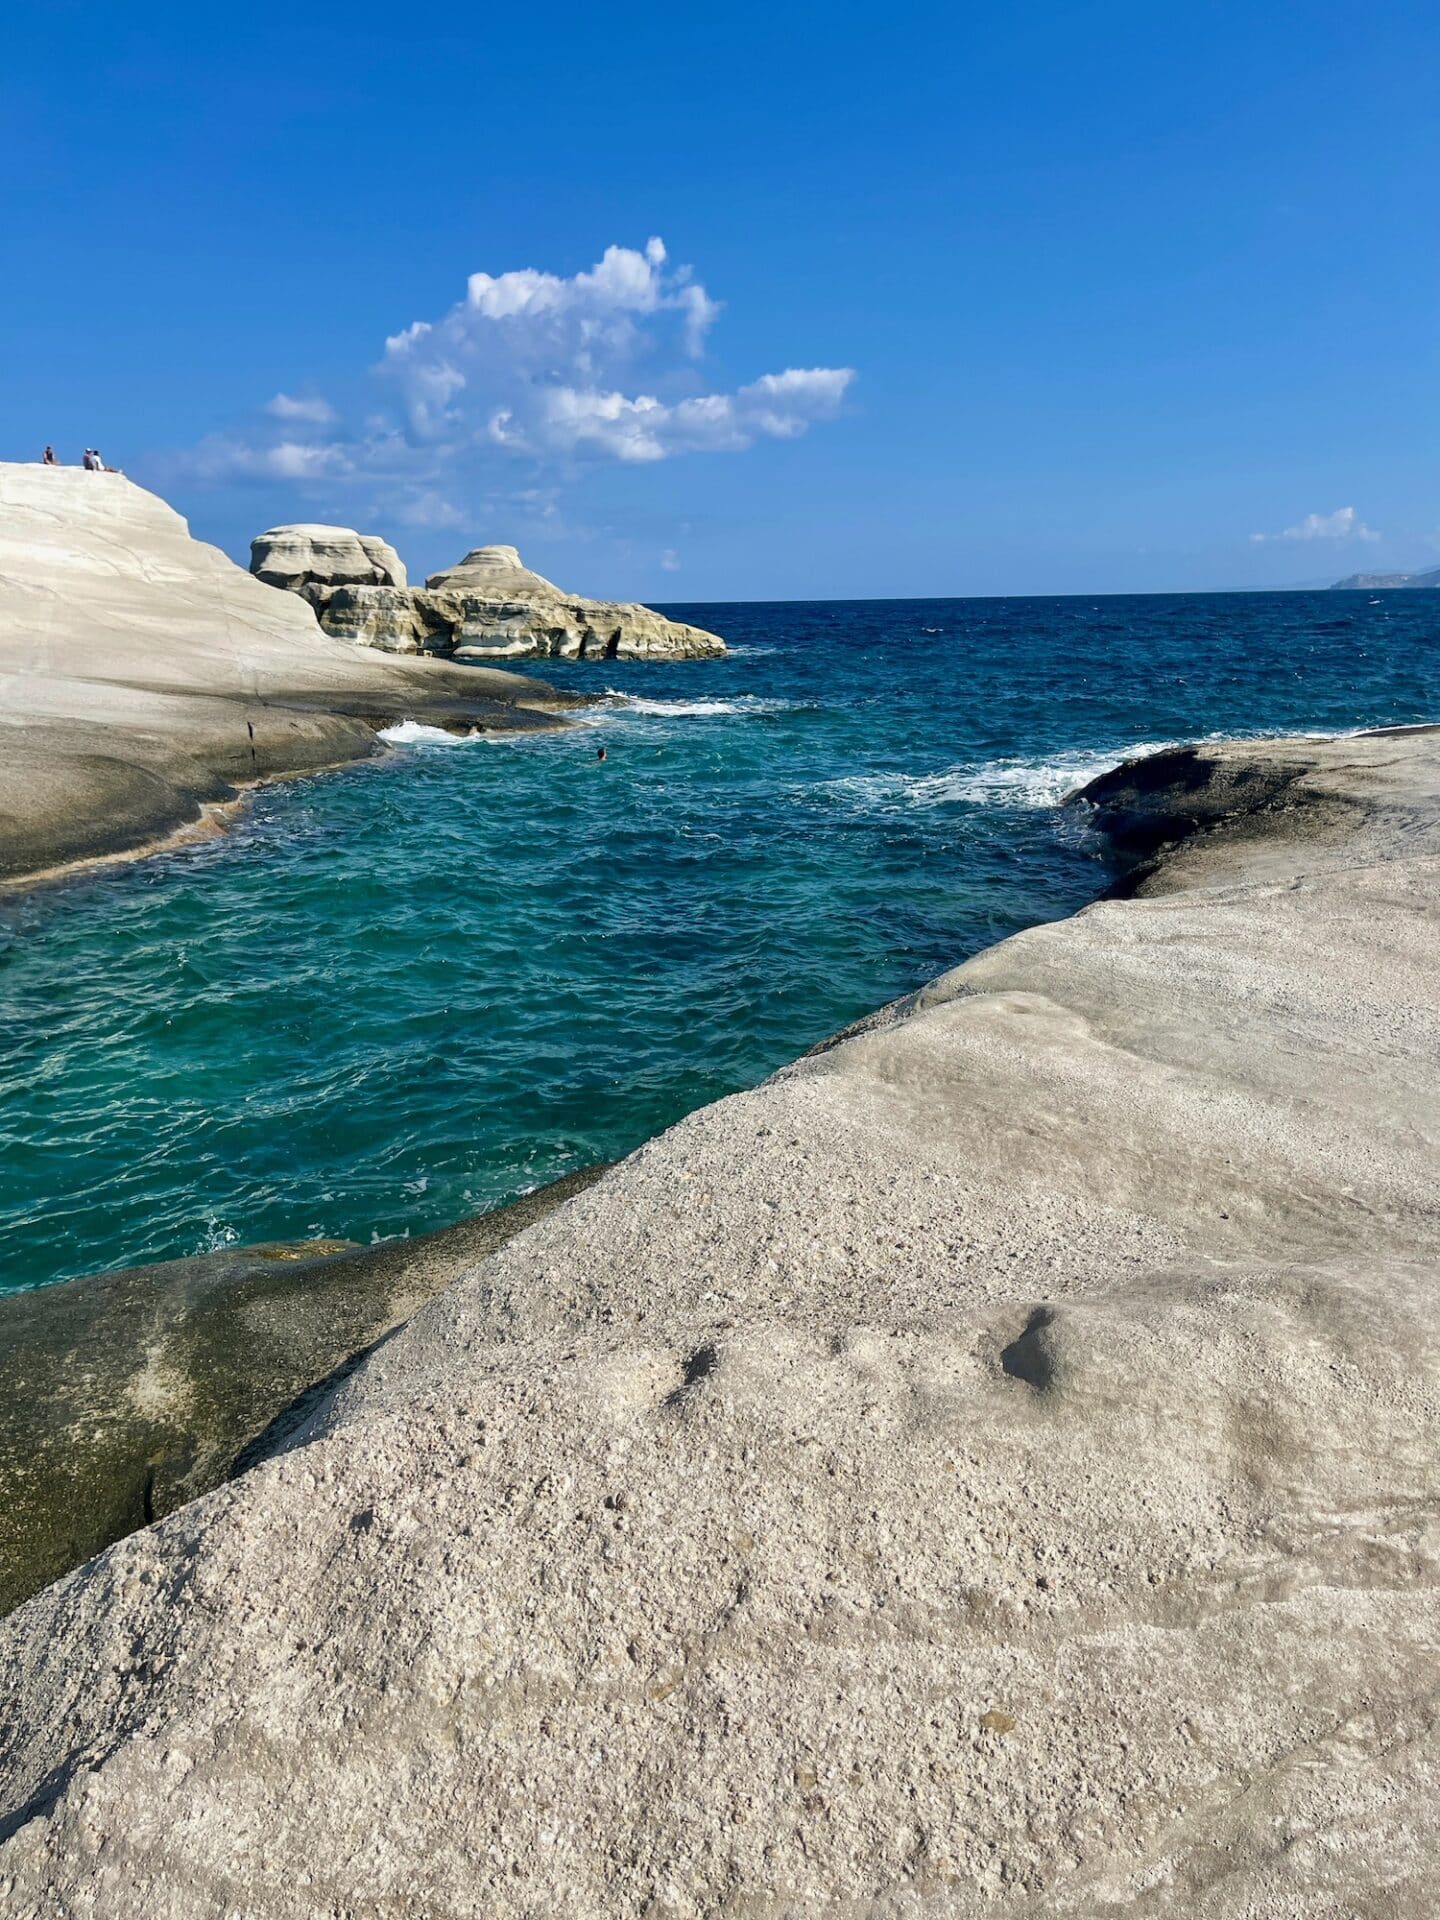 Rugged coastal landscape showcasing smooth rock formations against the deep blue waters of the sea and a partly cloudy sky.